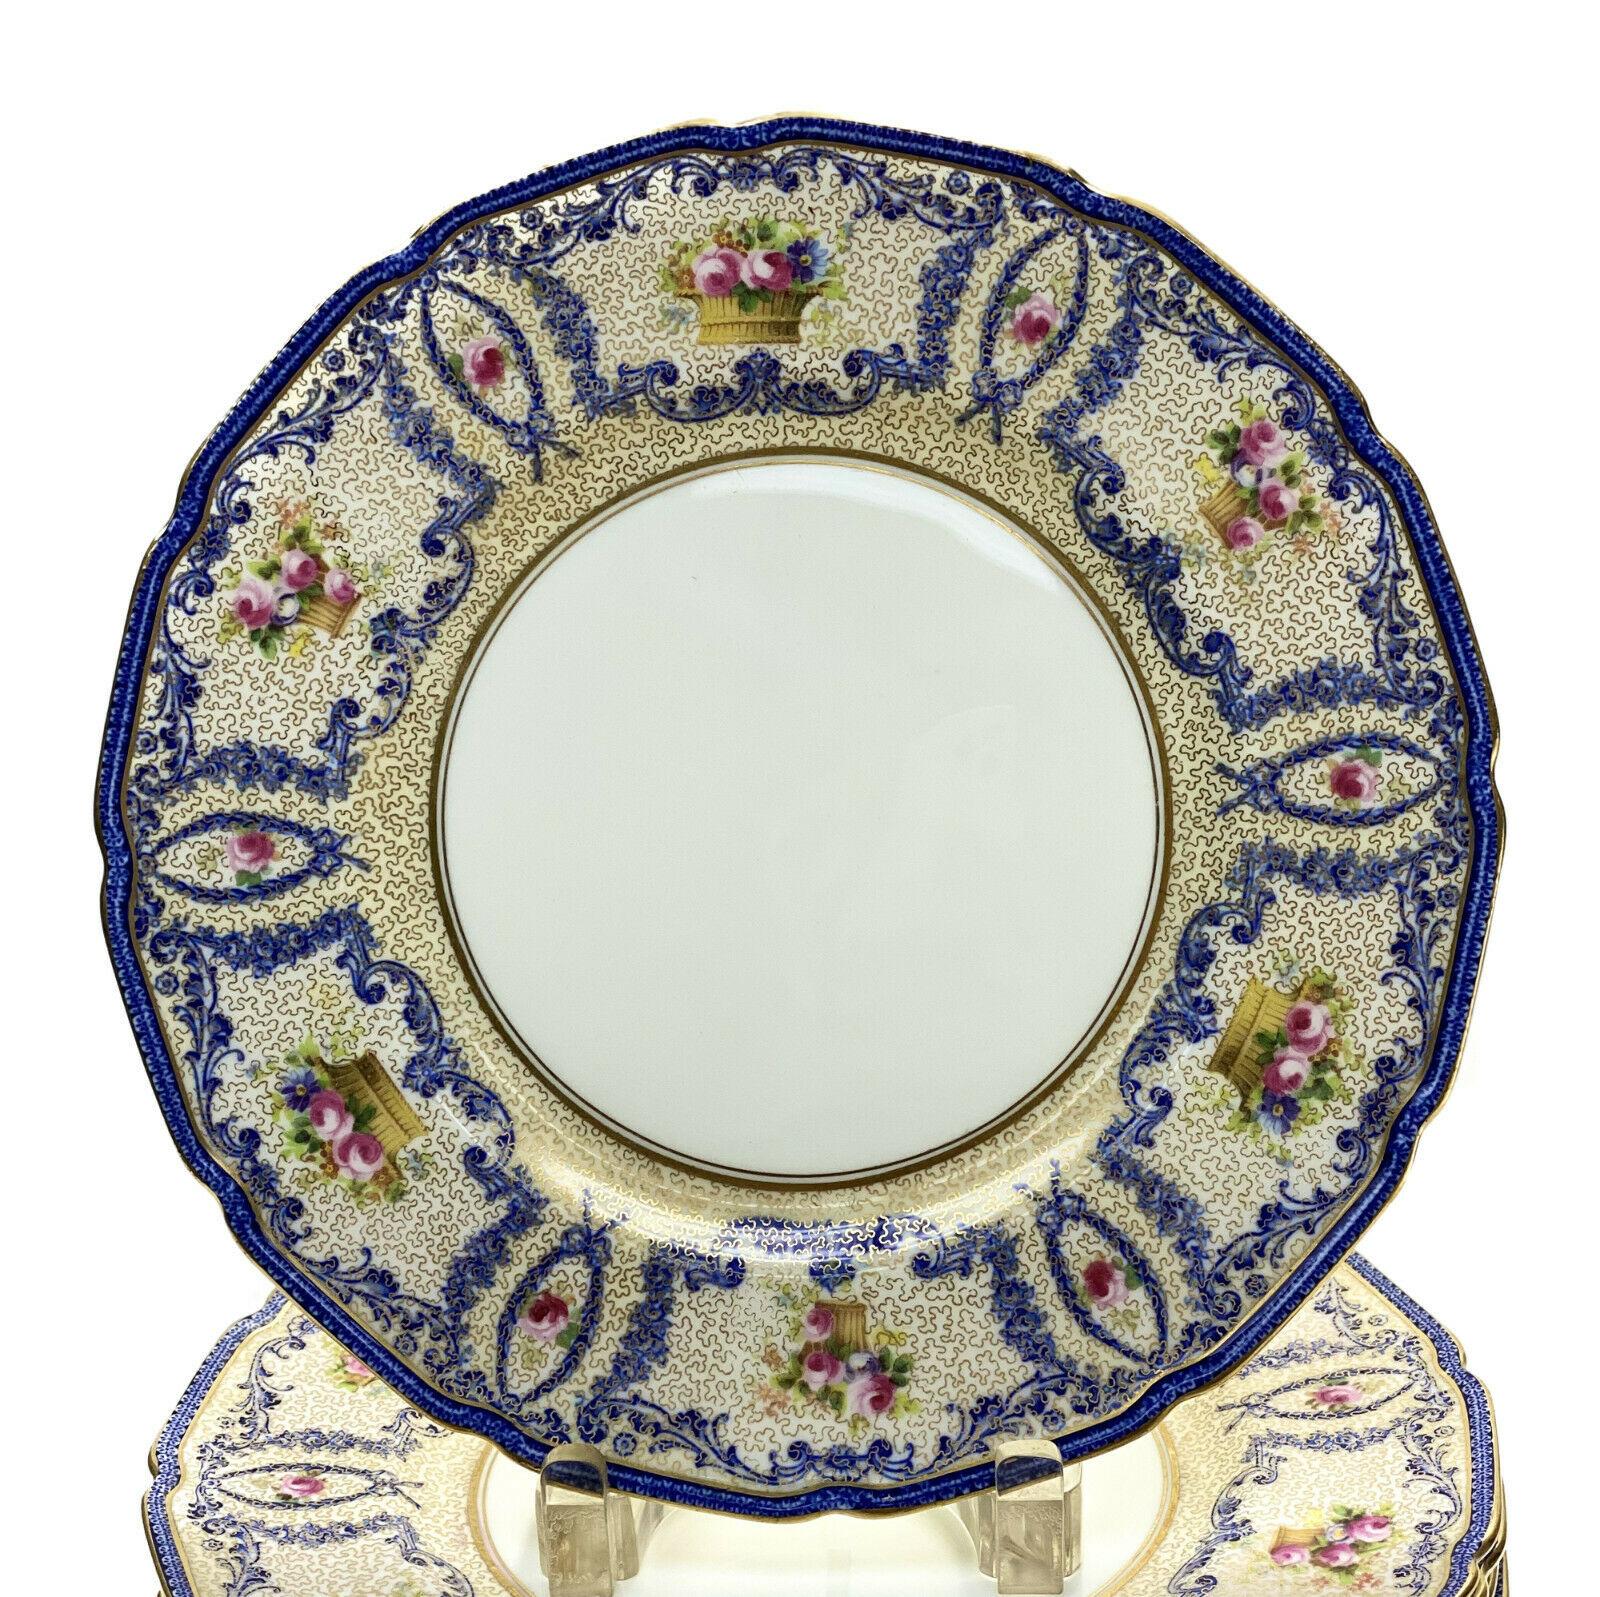 Set of 12 Royal Doulton England Porcelain Dinner Plates, circa 1925.

Additional Information:
Material: Porcelain. 
Featured Refinements: Royal Doulton Plate.
Year Manufactured: 1925.
Brand: Royal Doulton.
Type: Dinner Plate.
Dimension: